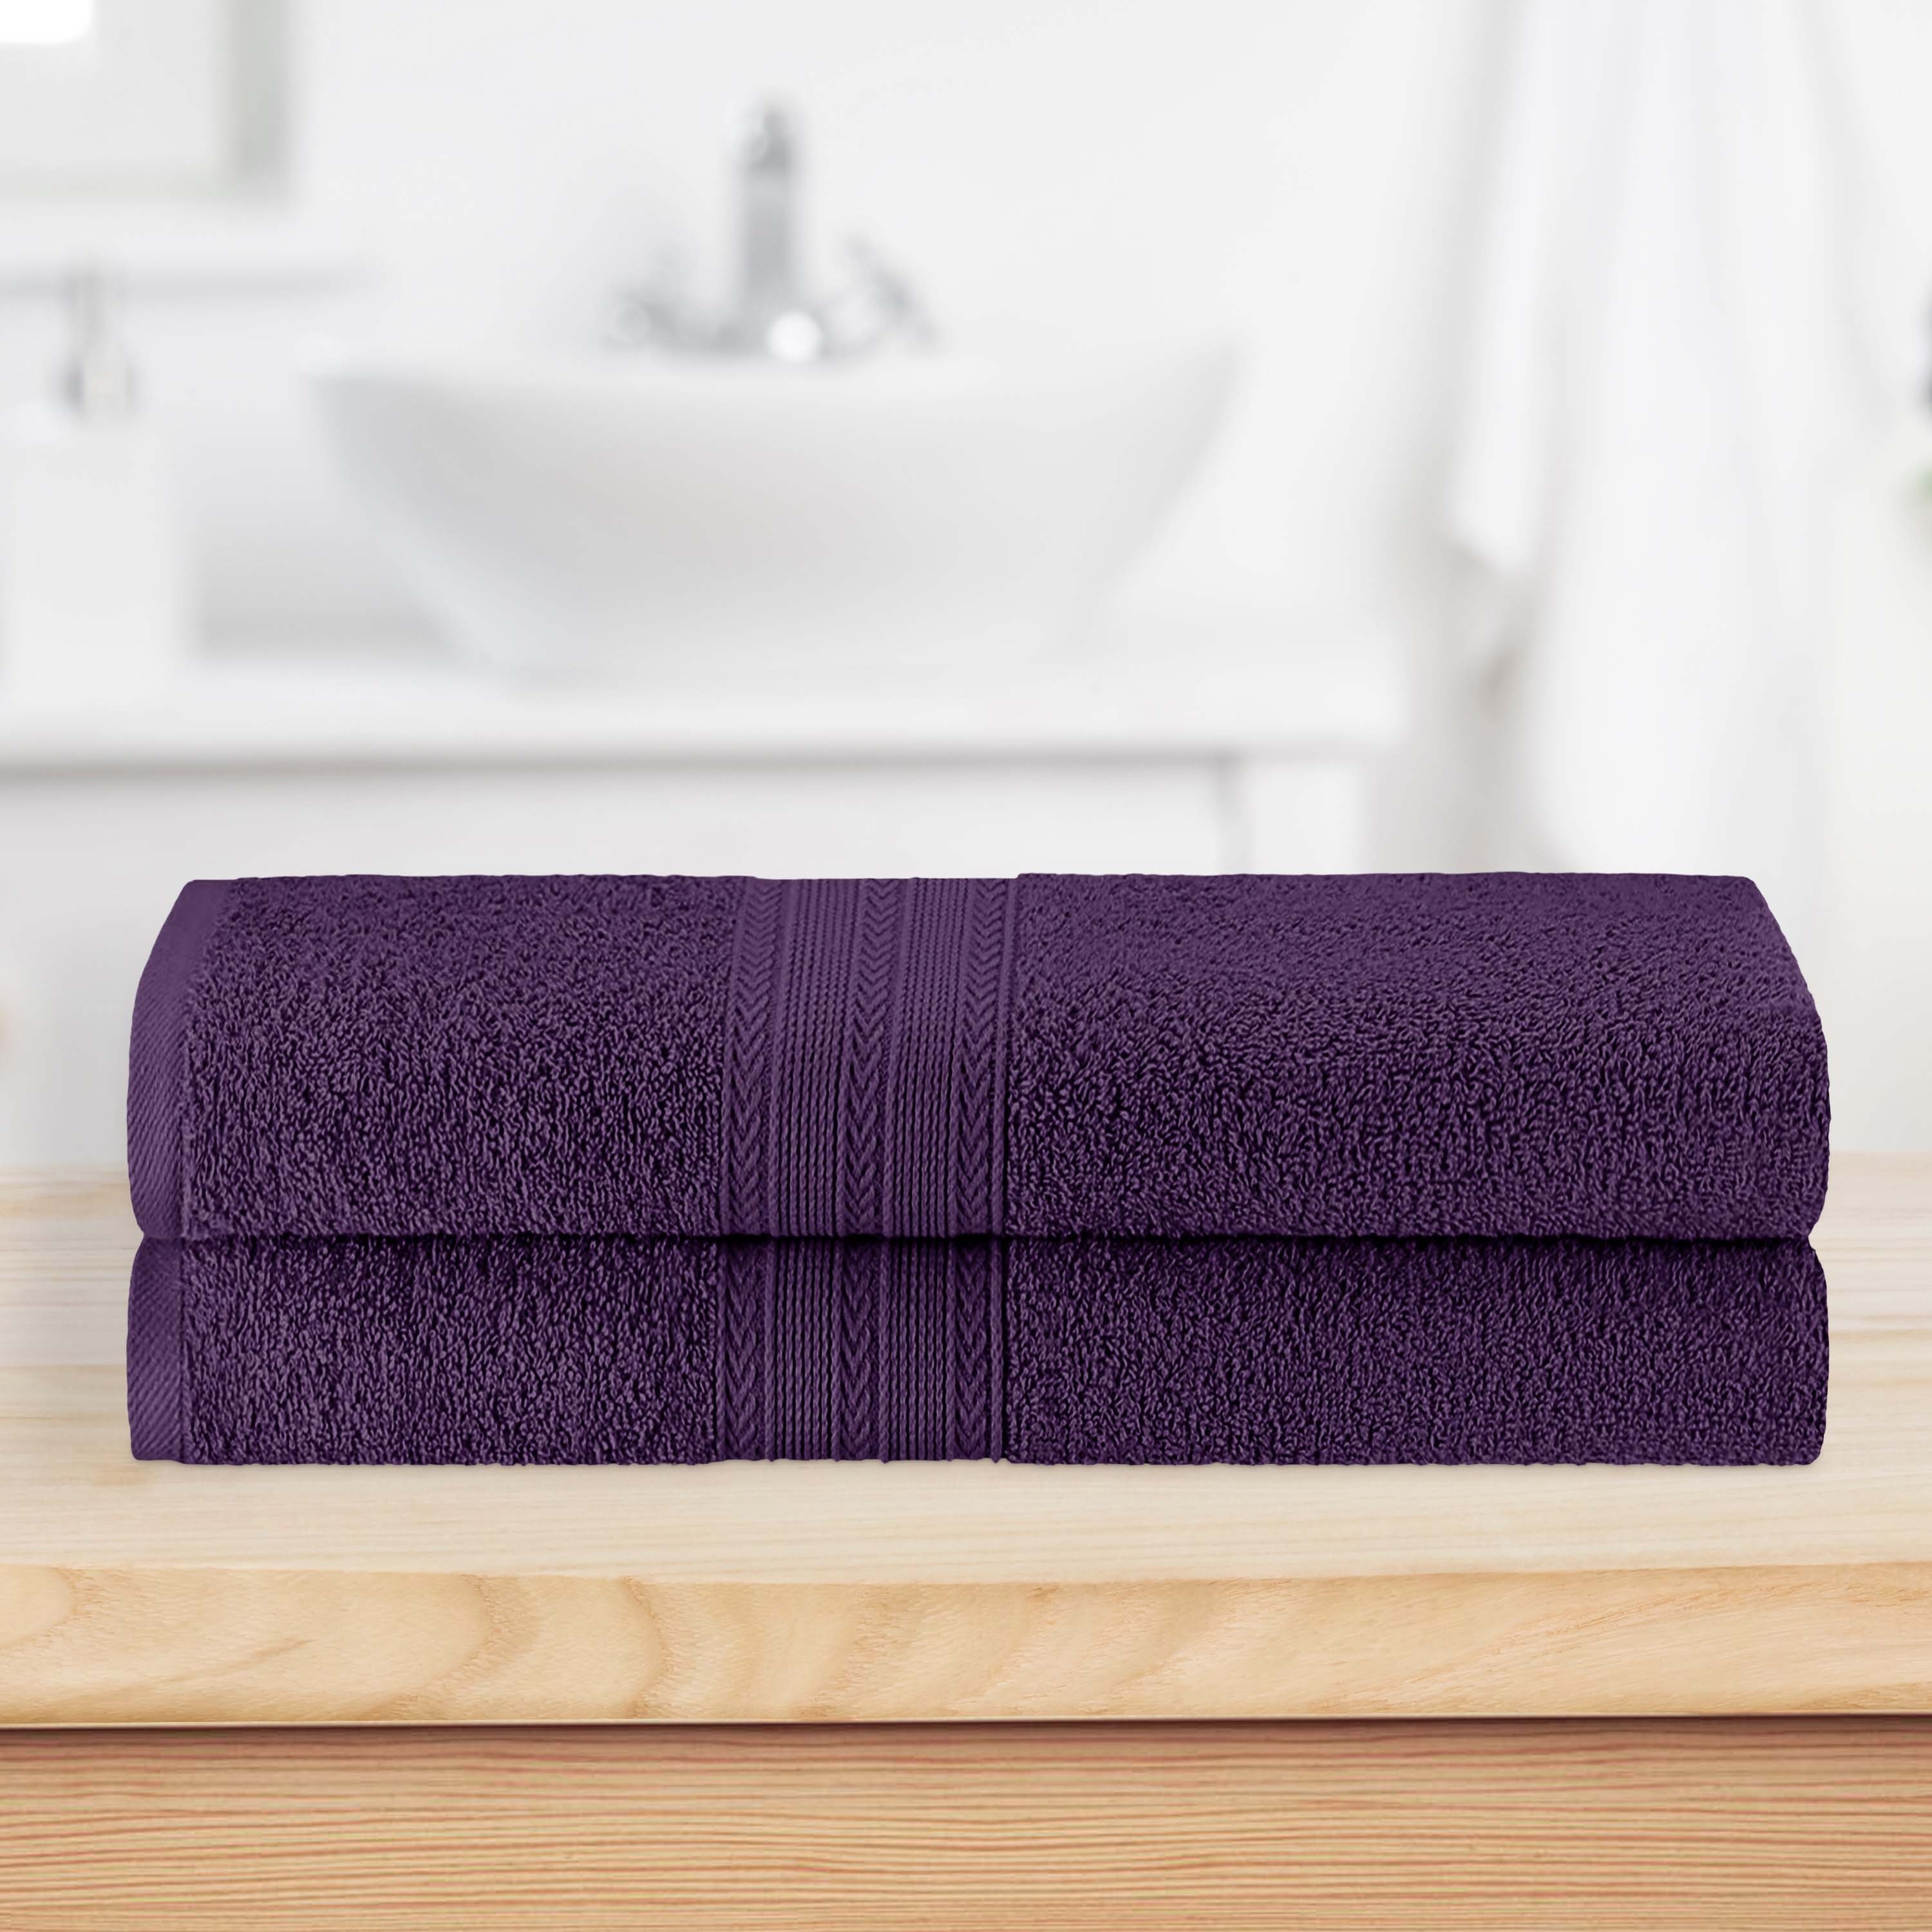 https://ak1.ostkcdn.com/images/products/is/images/direct/79461d11fe0c526021ac6dabe779adf0c7143ee6/Eco-Friendly-Sustainable-Cotton-Bath-Sheet-Set-of-2-by-Superior.jpg